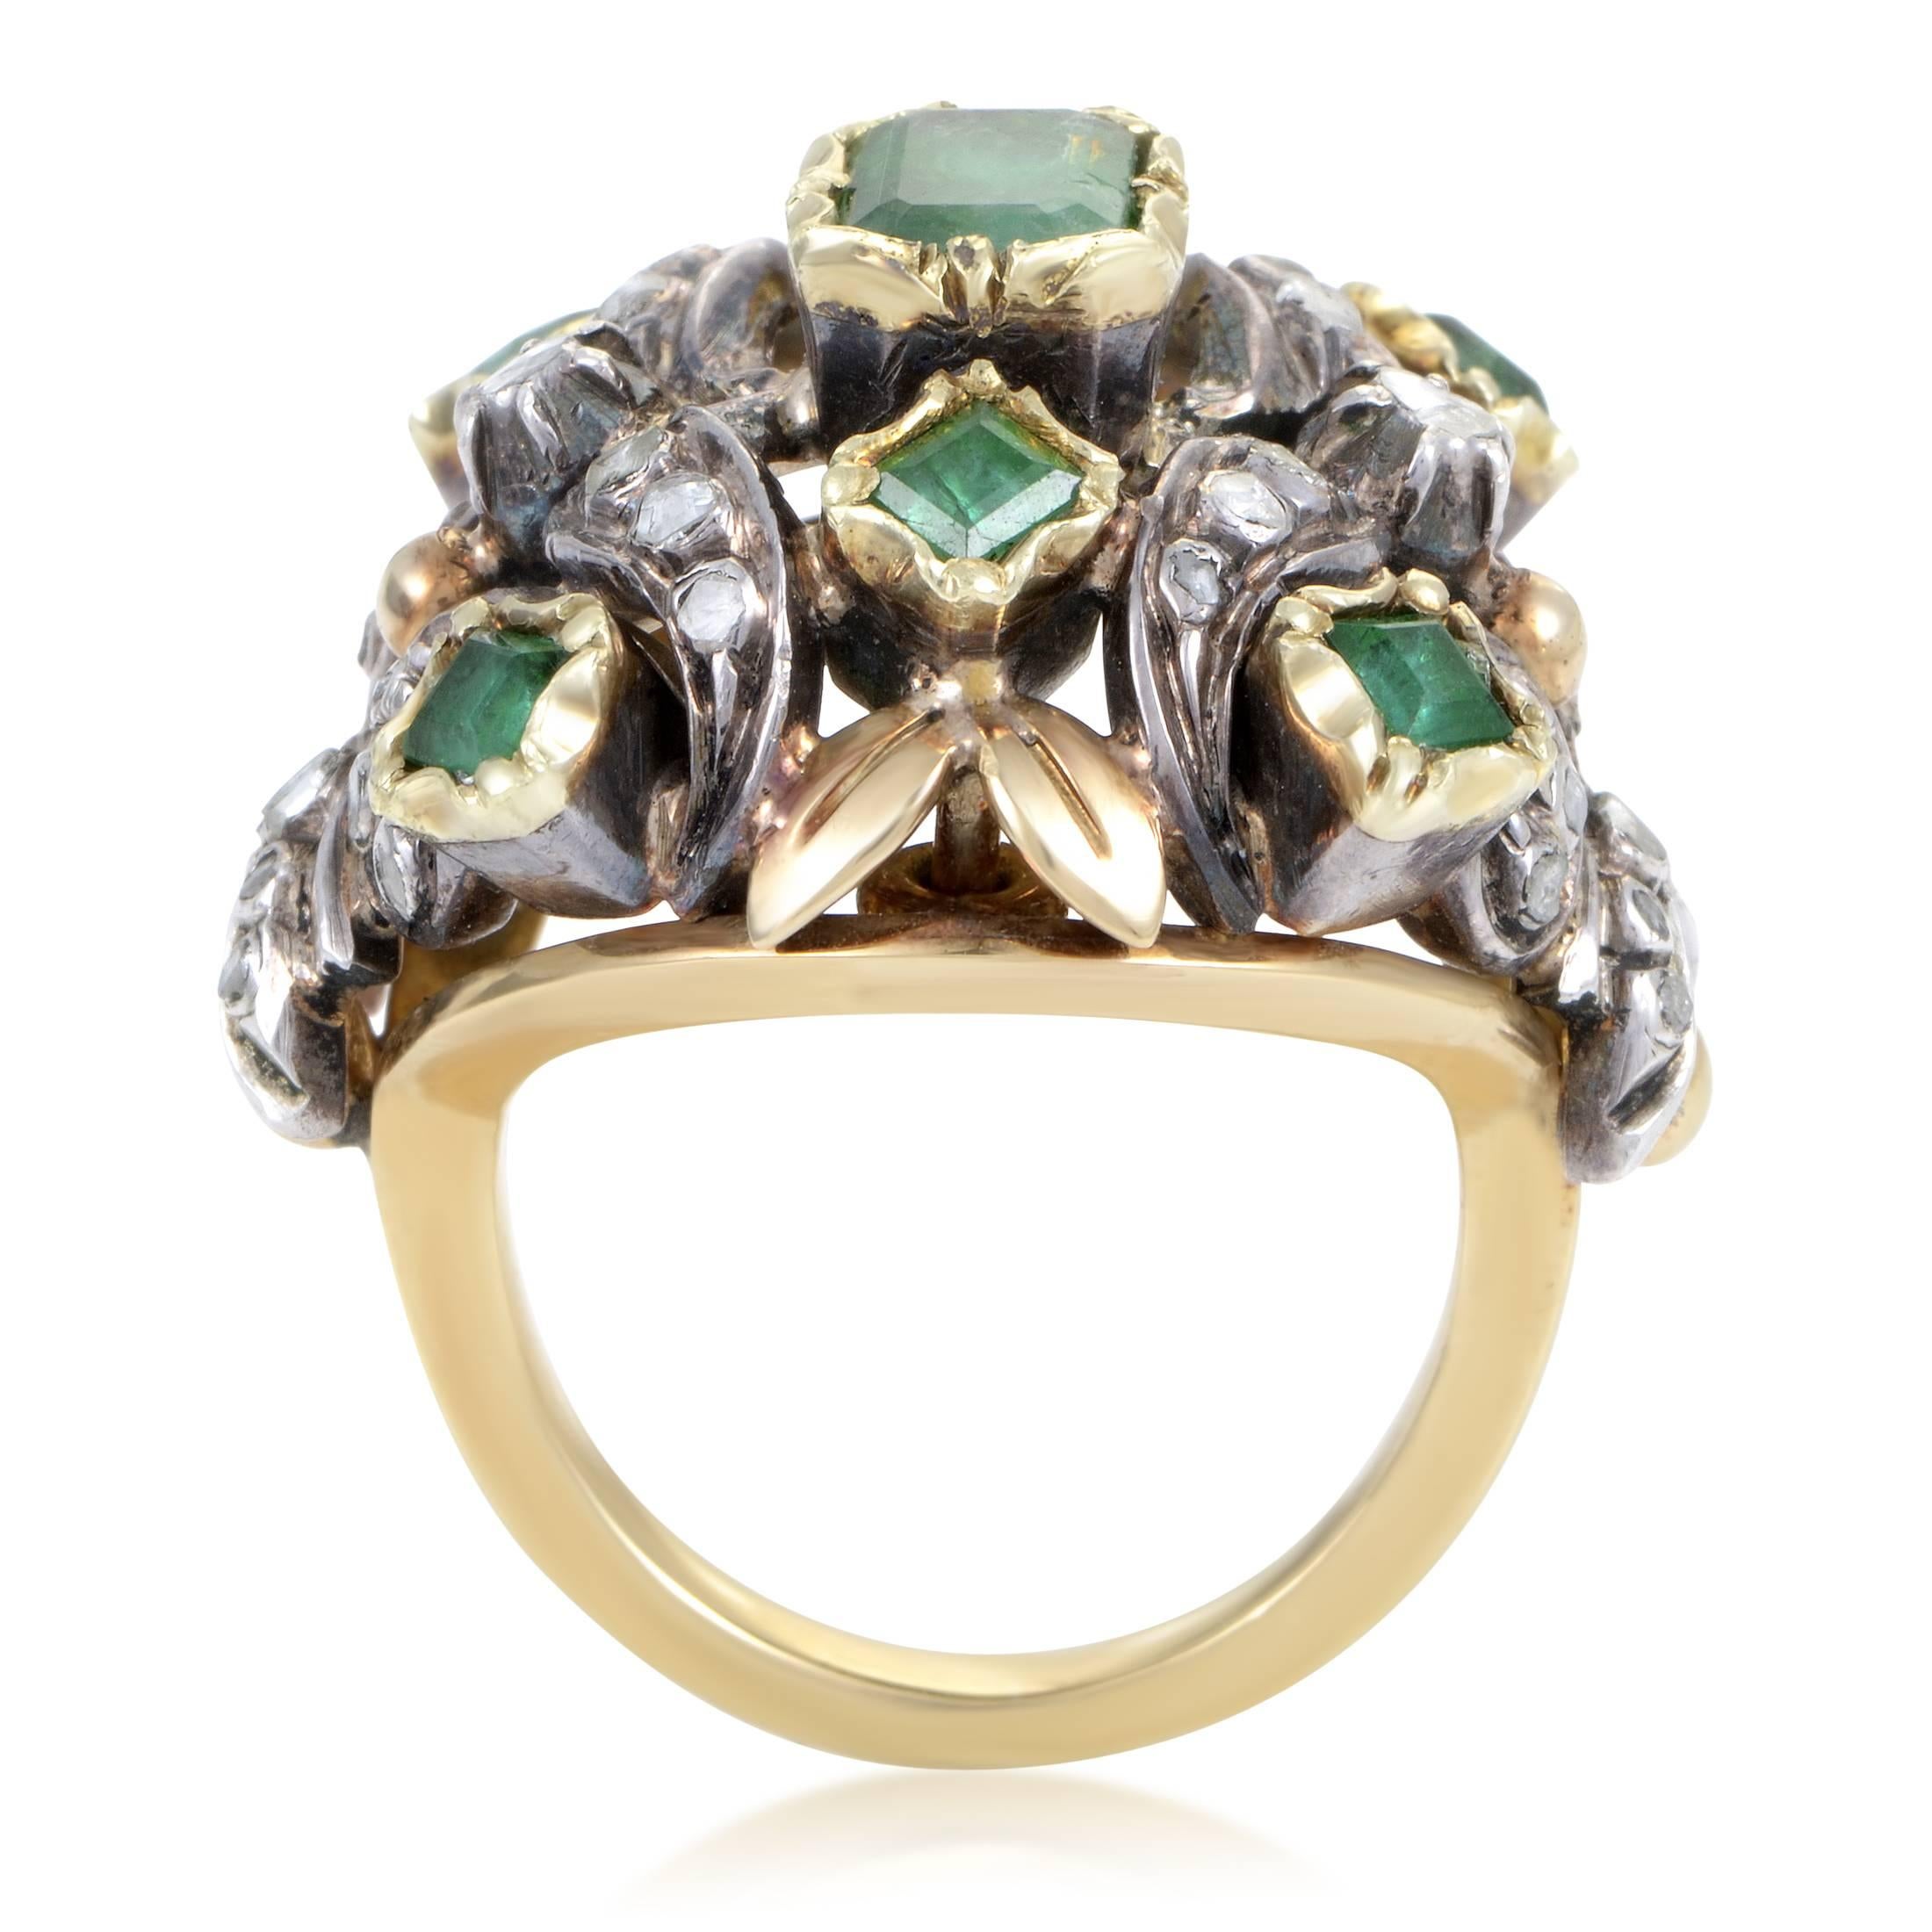 Scattered in a seemingly chaotic manner across the compelling décor created by marvelous interplay of radiant 18K yellow gold and shimmering silver, the fantastic emeralds weighing in total 3.00 carats and glittering diamonds totaling 0.85ct